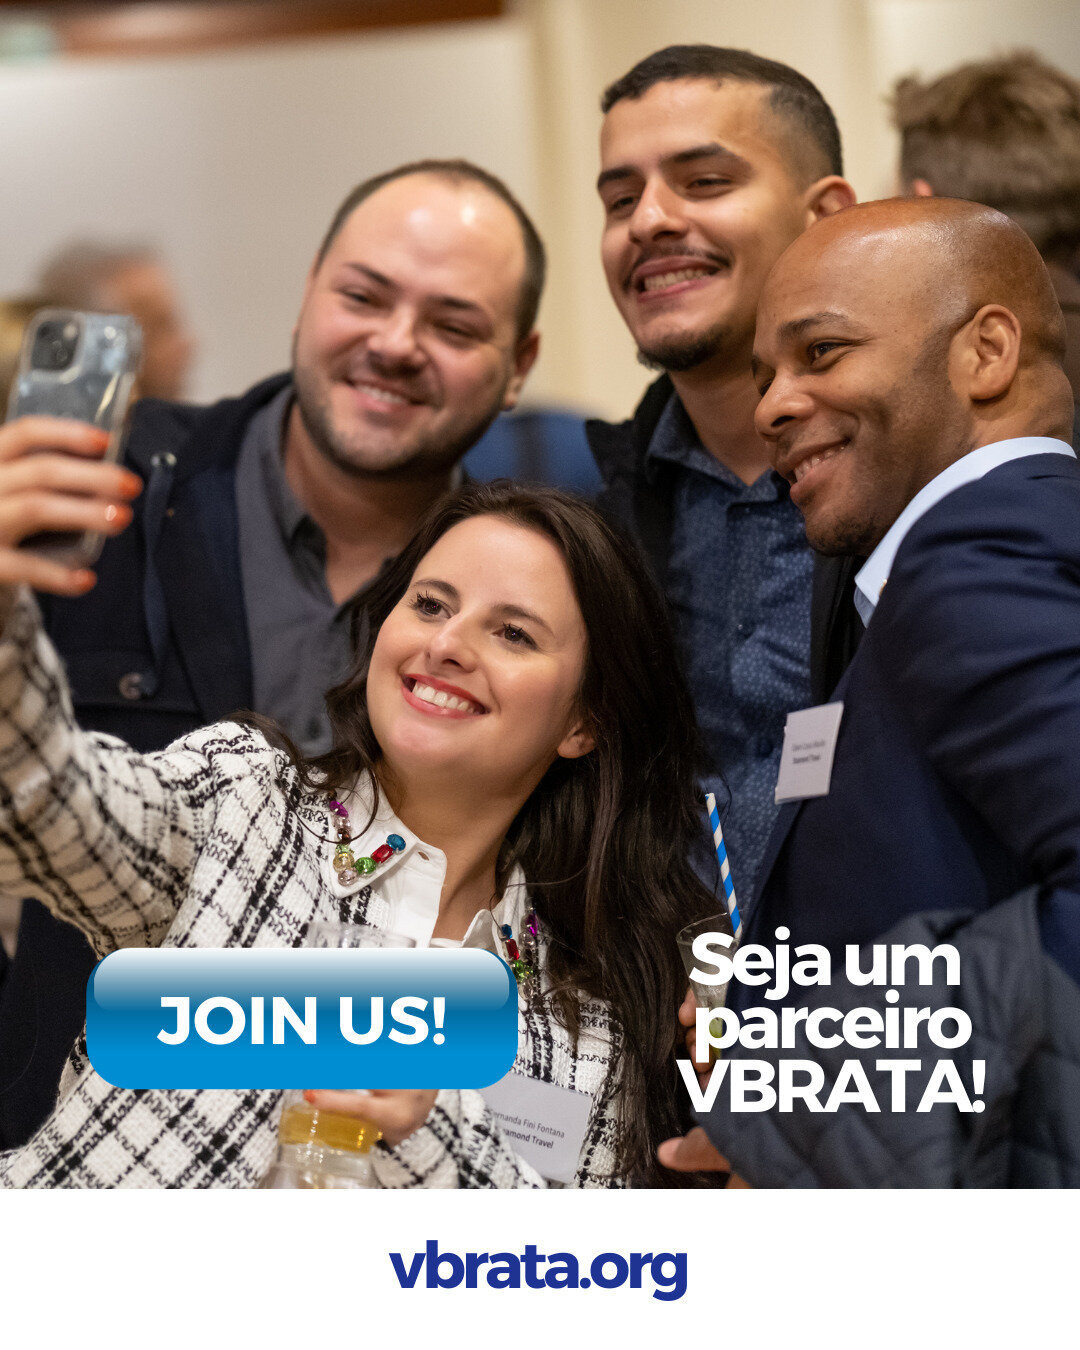 Unlock new travel opportunities with VBRATA! Join as a Tour Operator, Affiliate, or Associate Member and expand your horizons with Brazil. Discover the benefits and how to apply on our website. 🌐🇧🇷 

#Embratur #visitbrasil #travel #braziliantravel